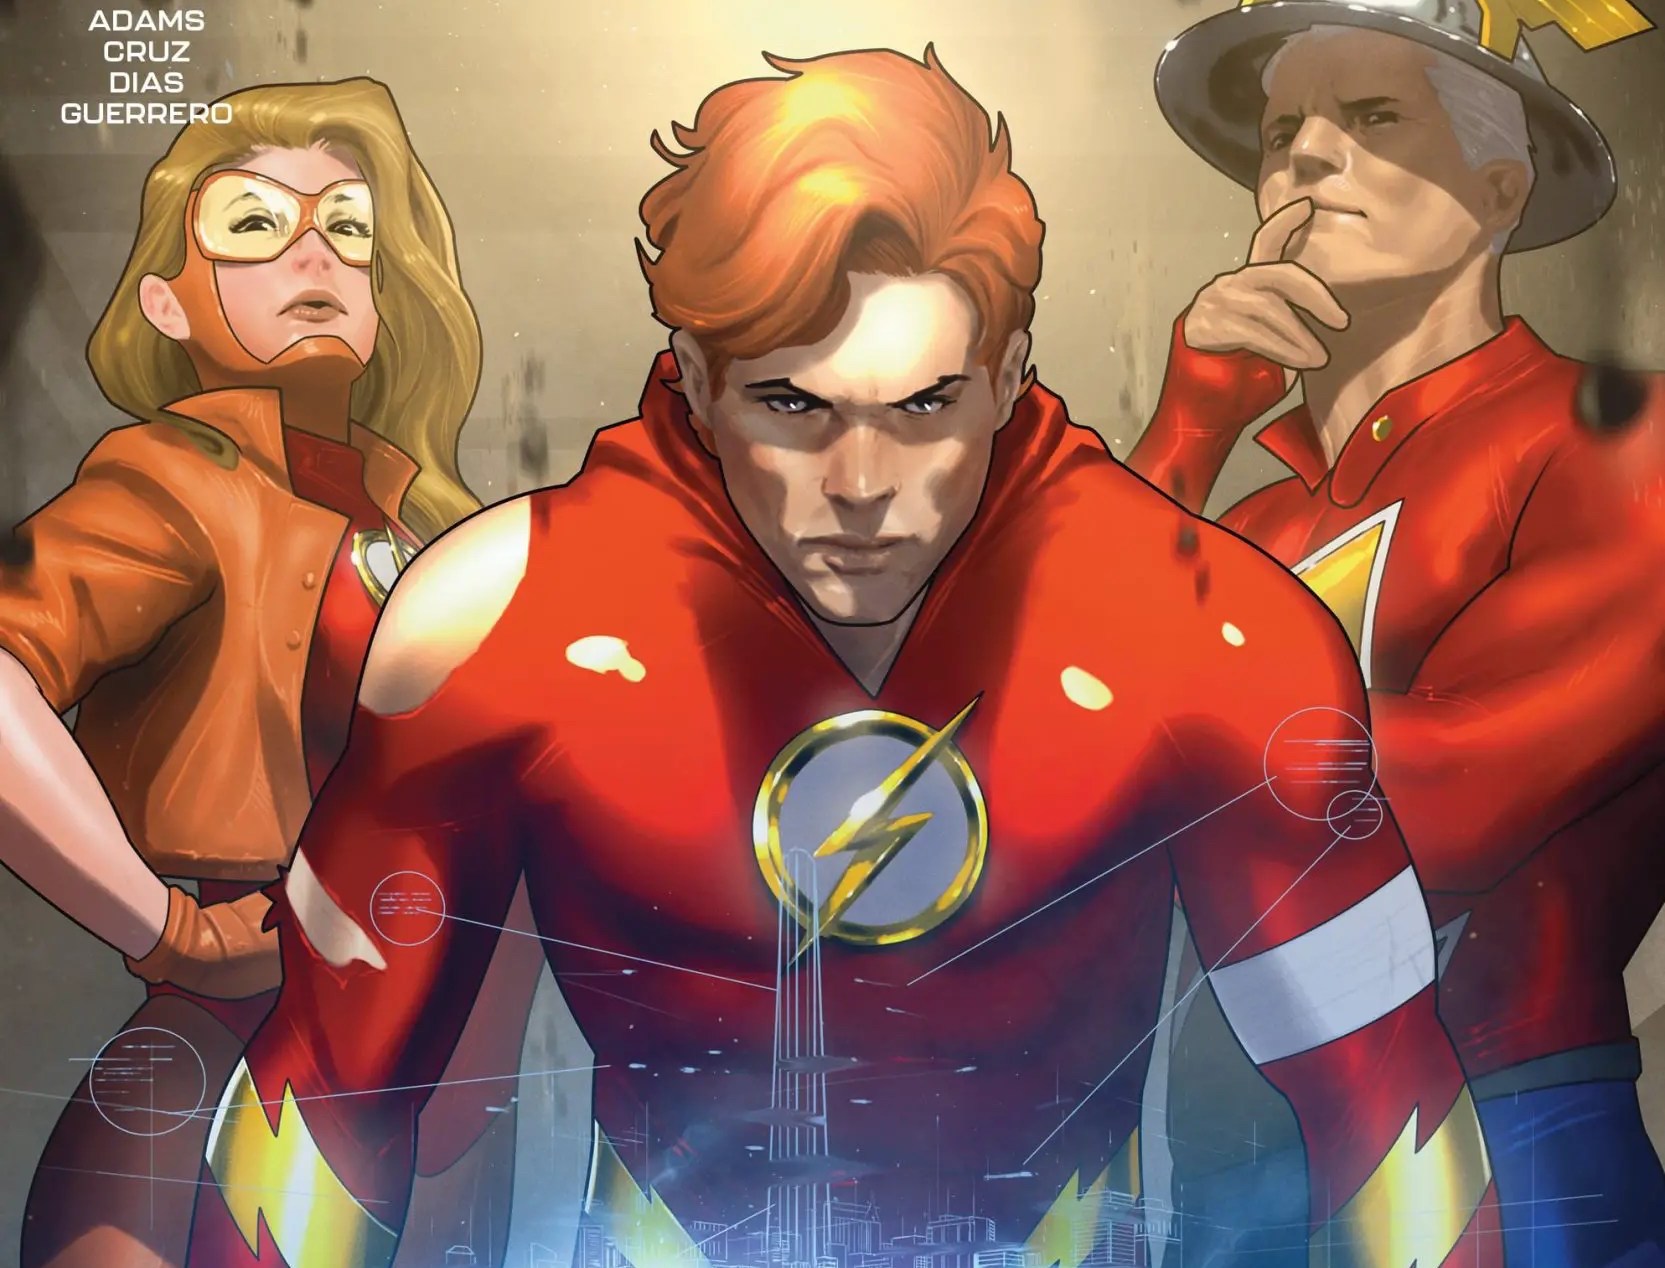 'The Flash' #793 has the heroes go from defense to offense